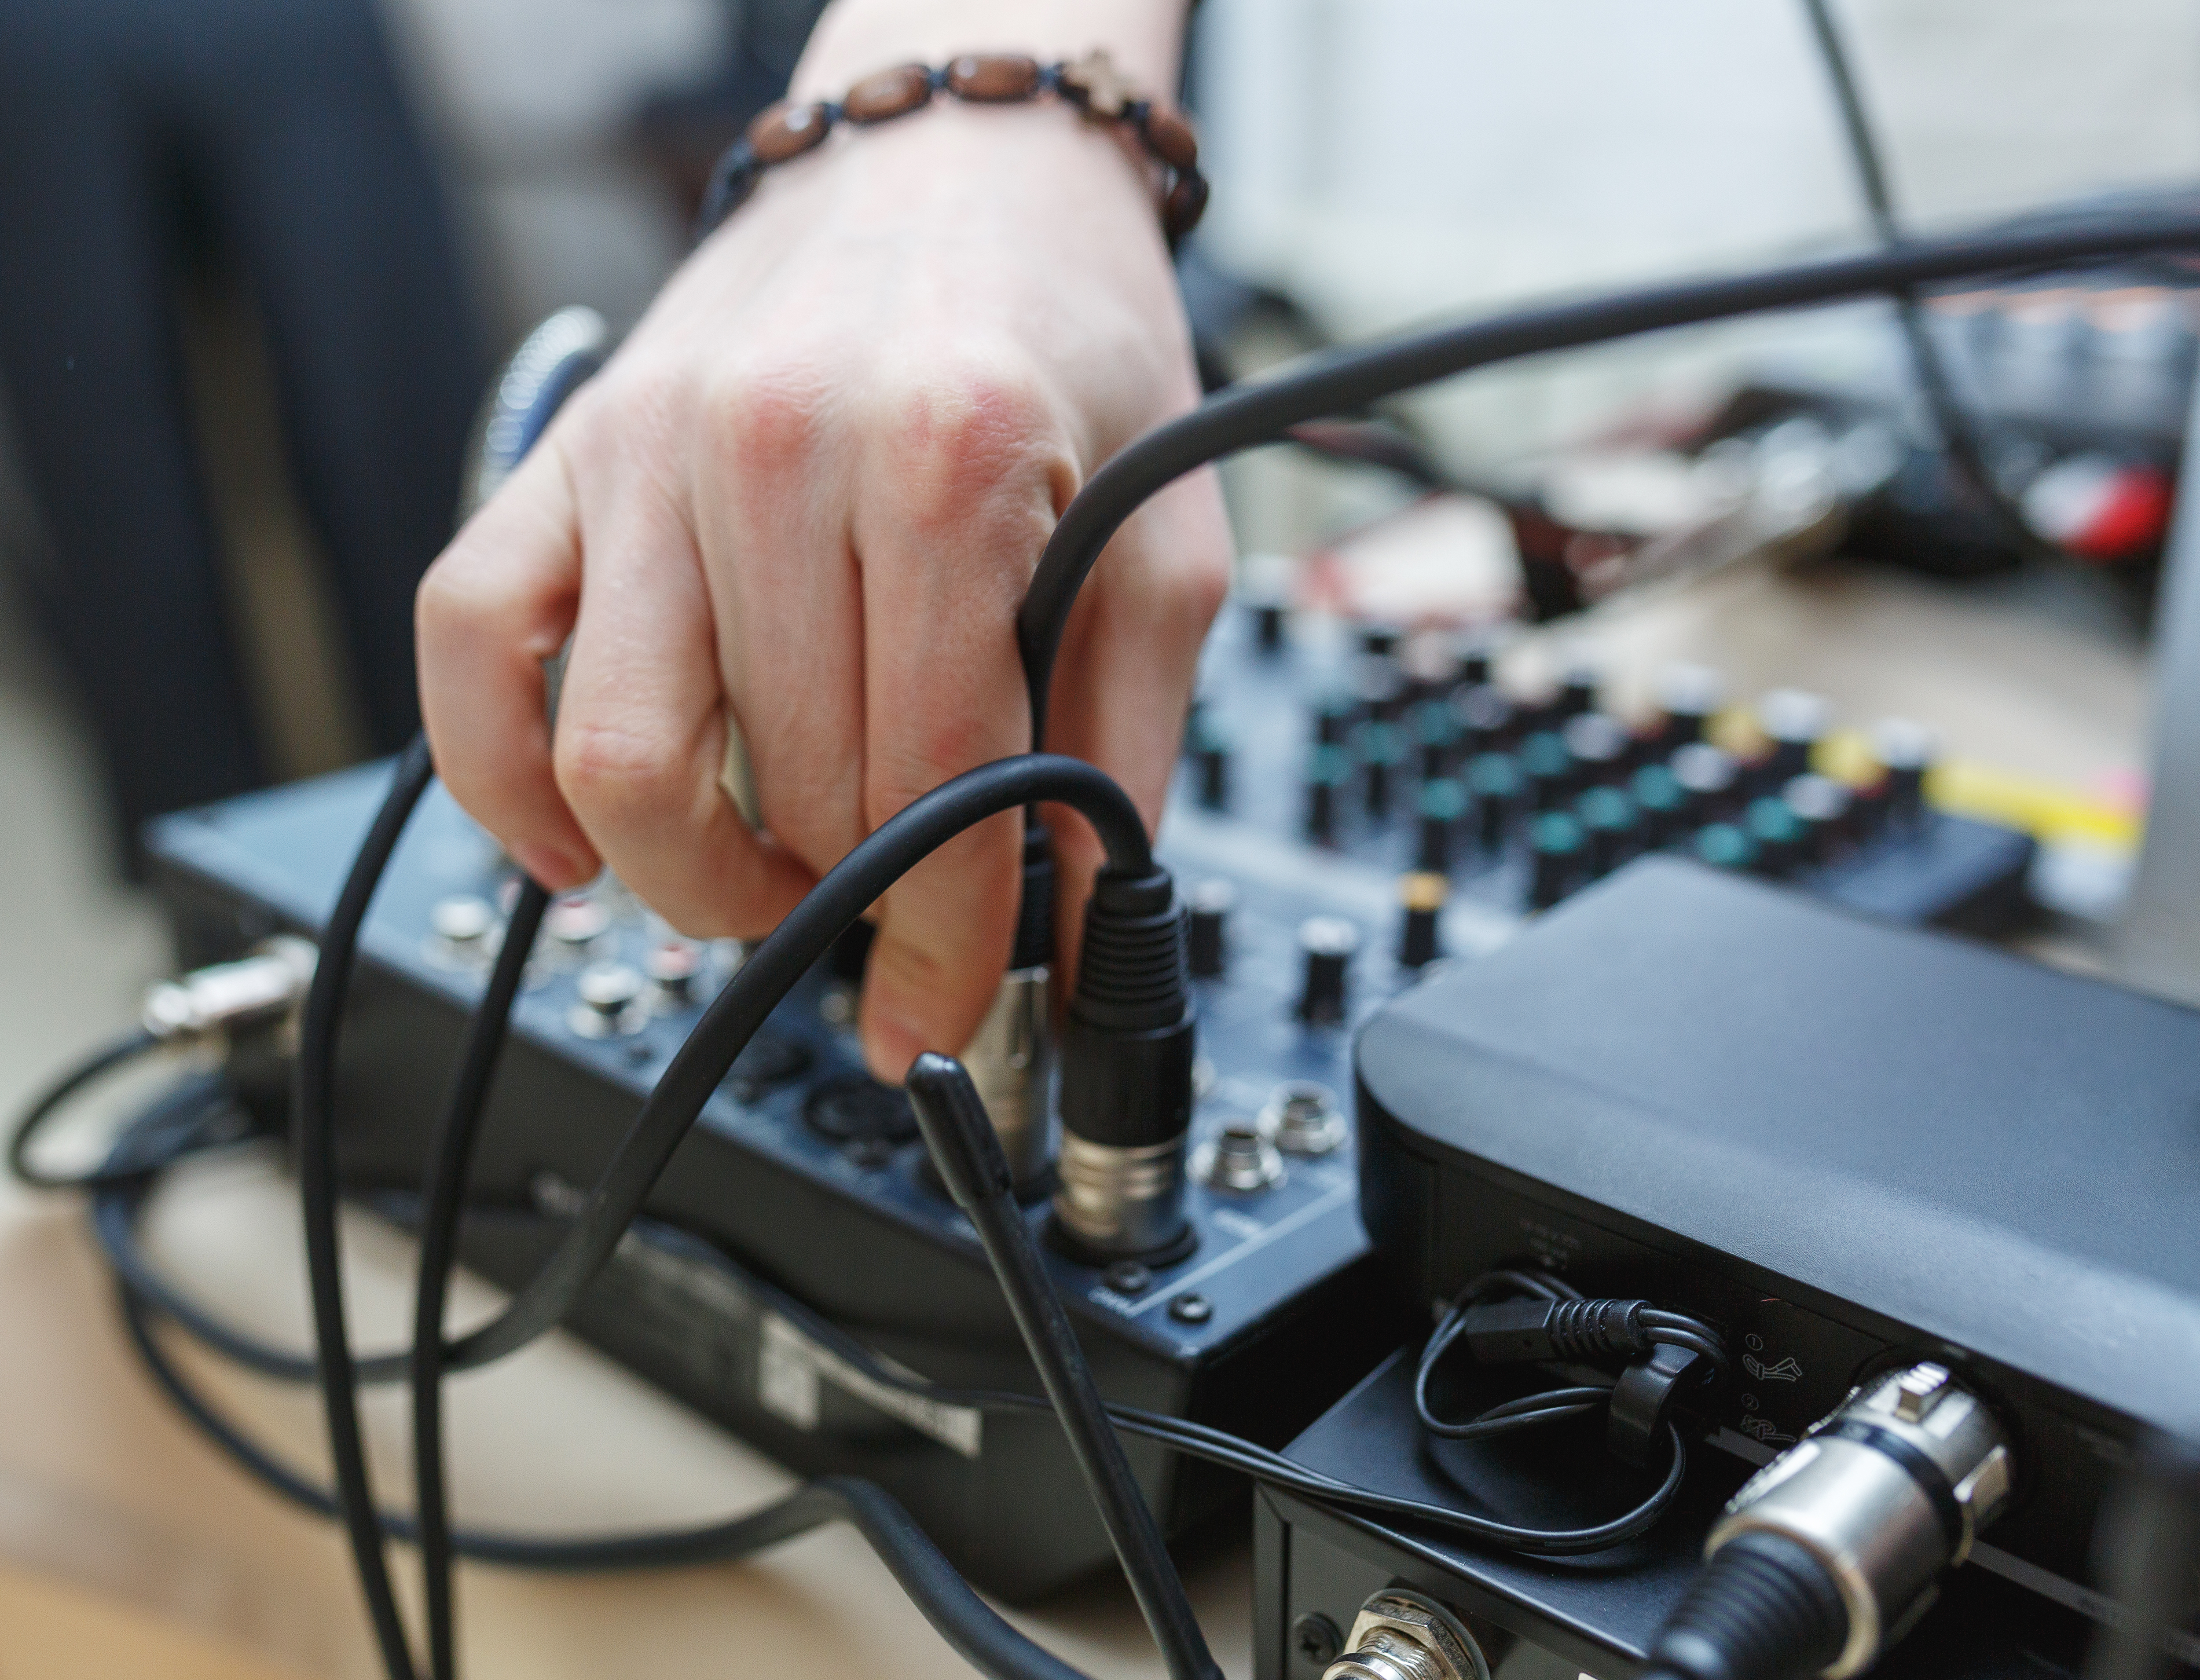 DJ connects the sound equipment for the event or party. man's hand holding the audio connector on the background of the sound equipment.